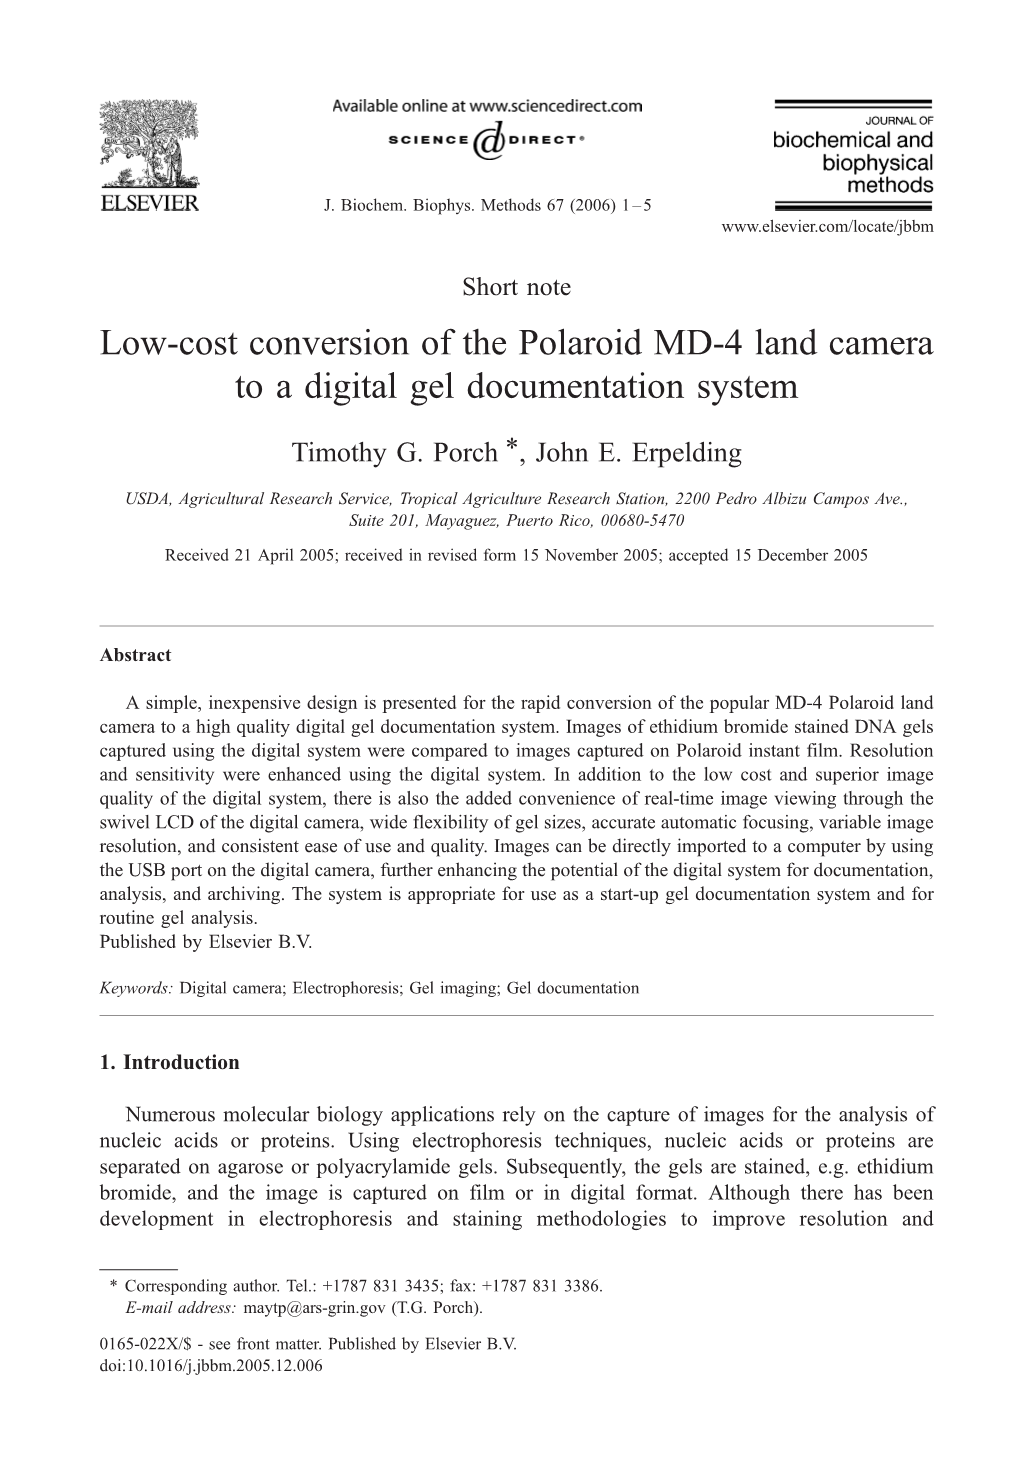 Low-Cost Conversion of the Polaroid MD-4 Land Camera to a Digital Gel Documentation System